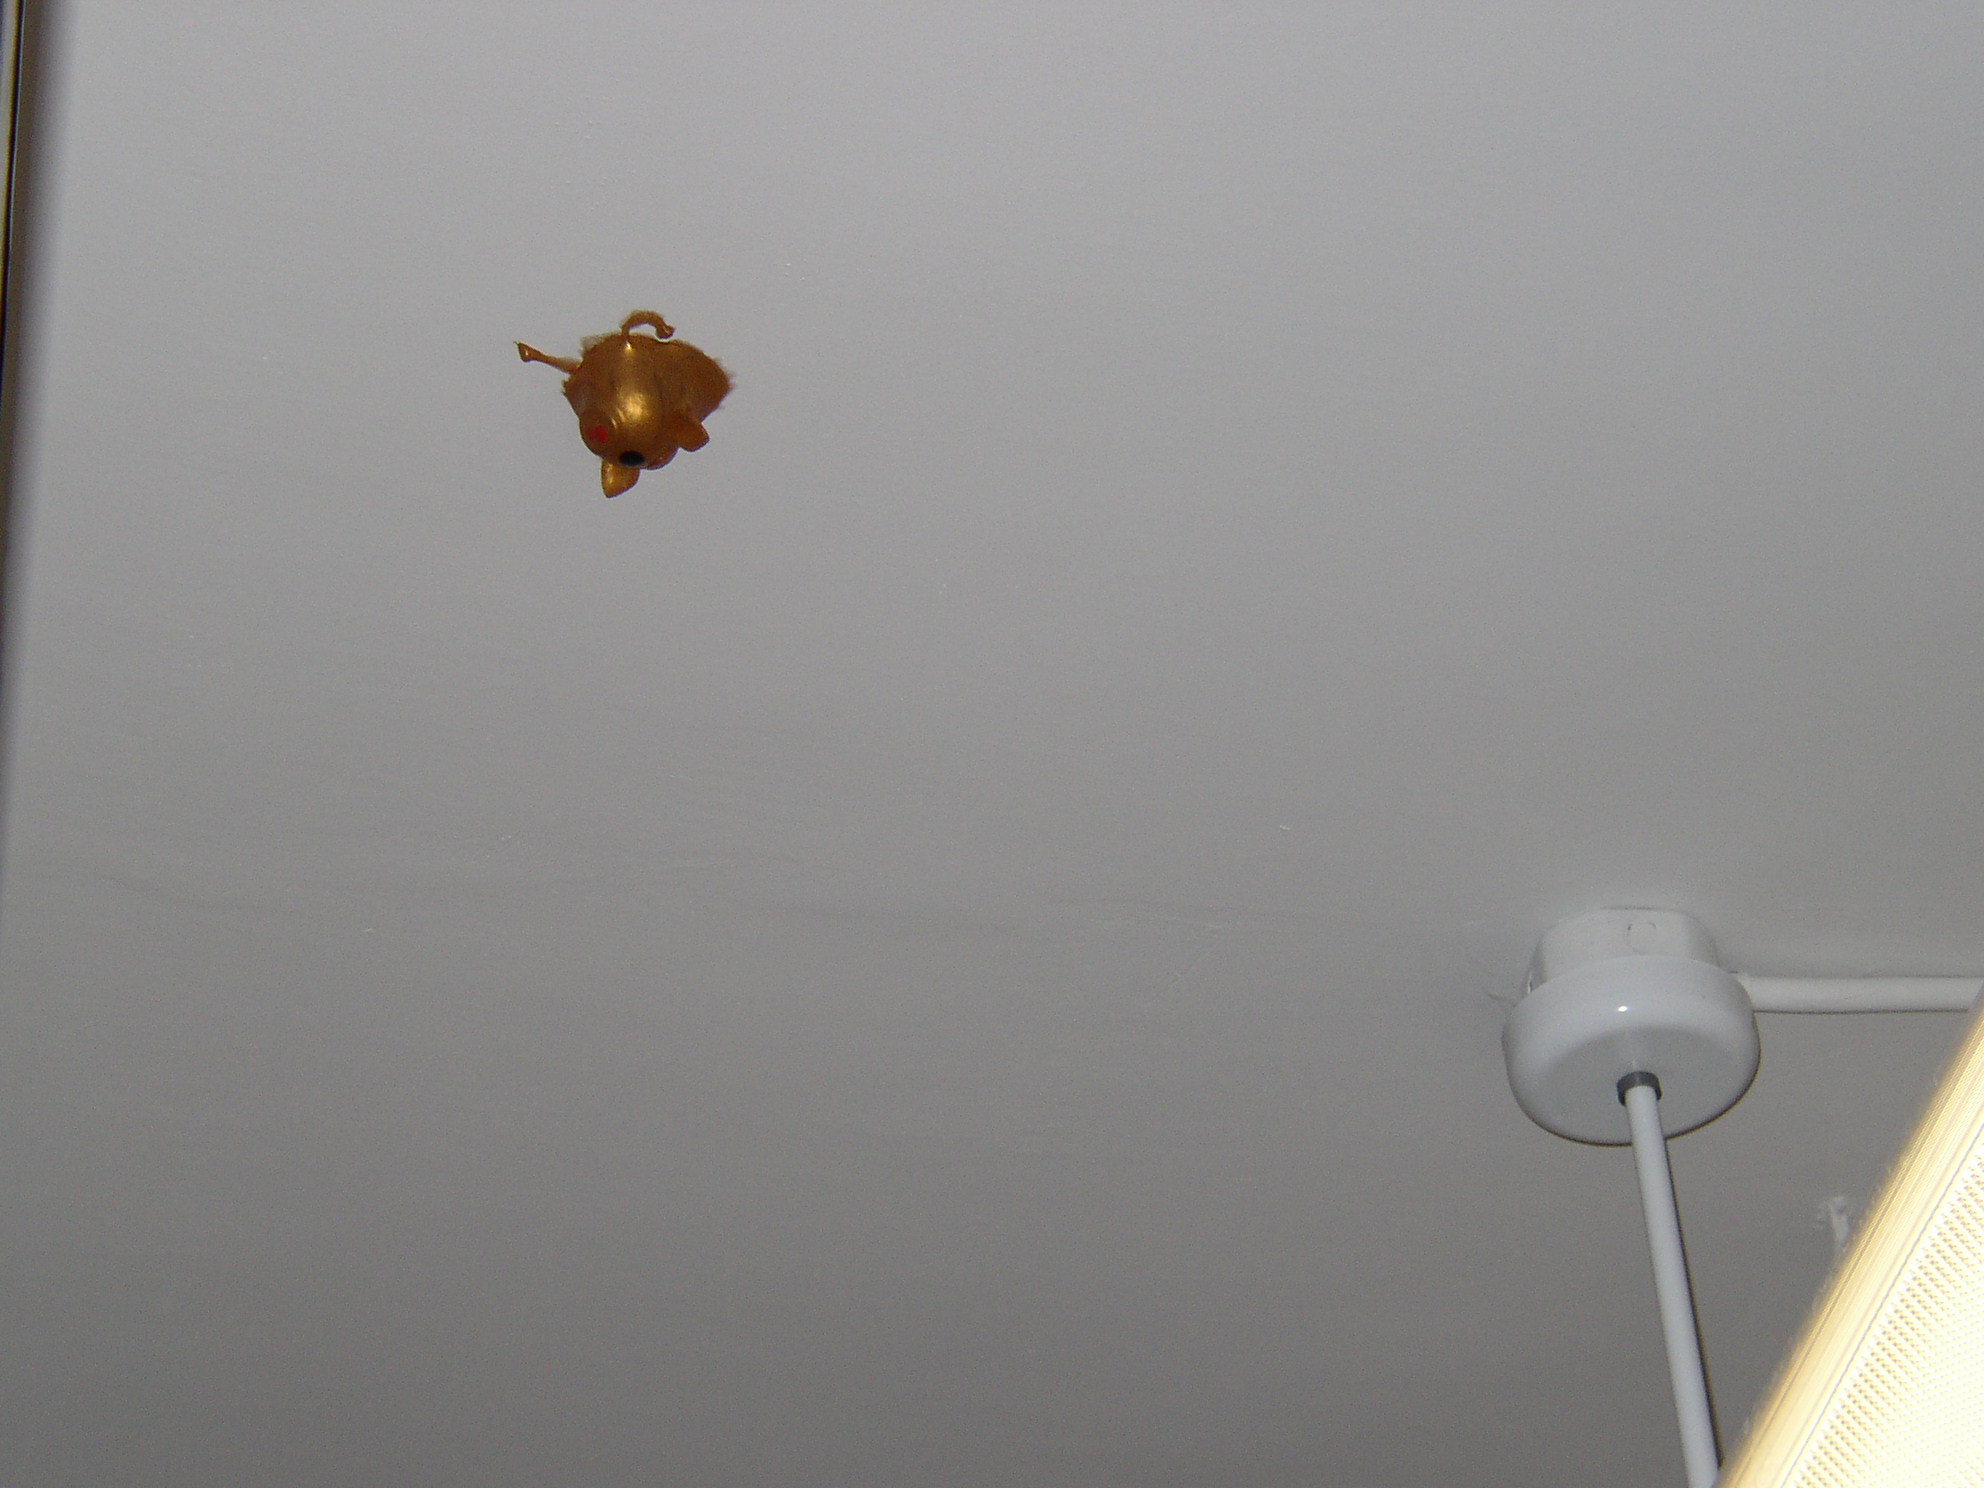 A gold squishy pig on the ceiling. 